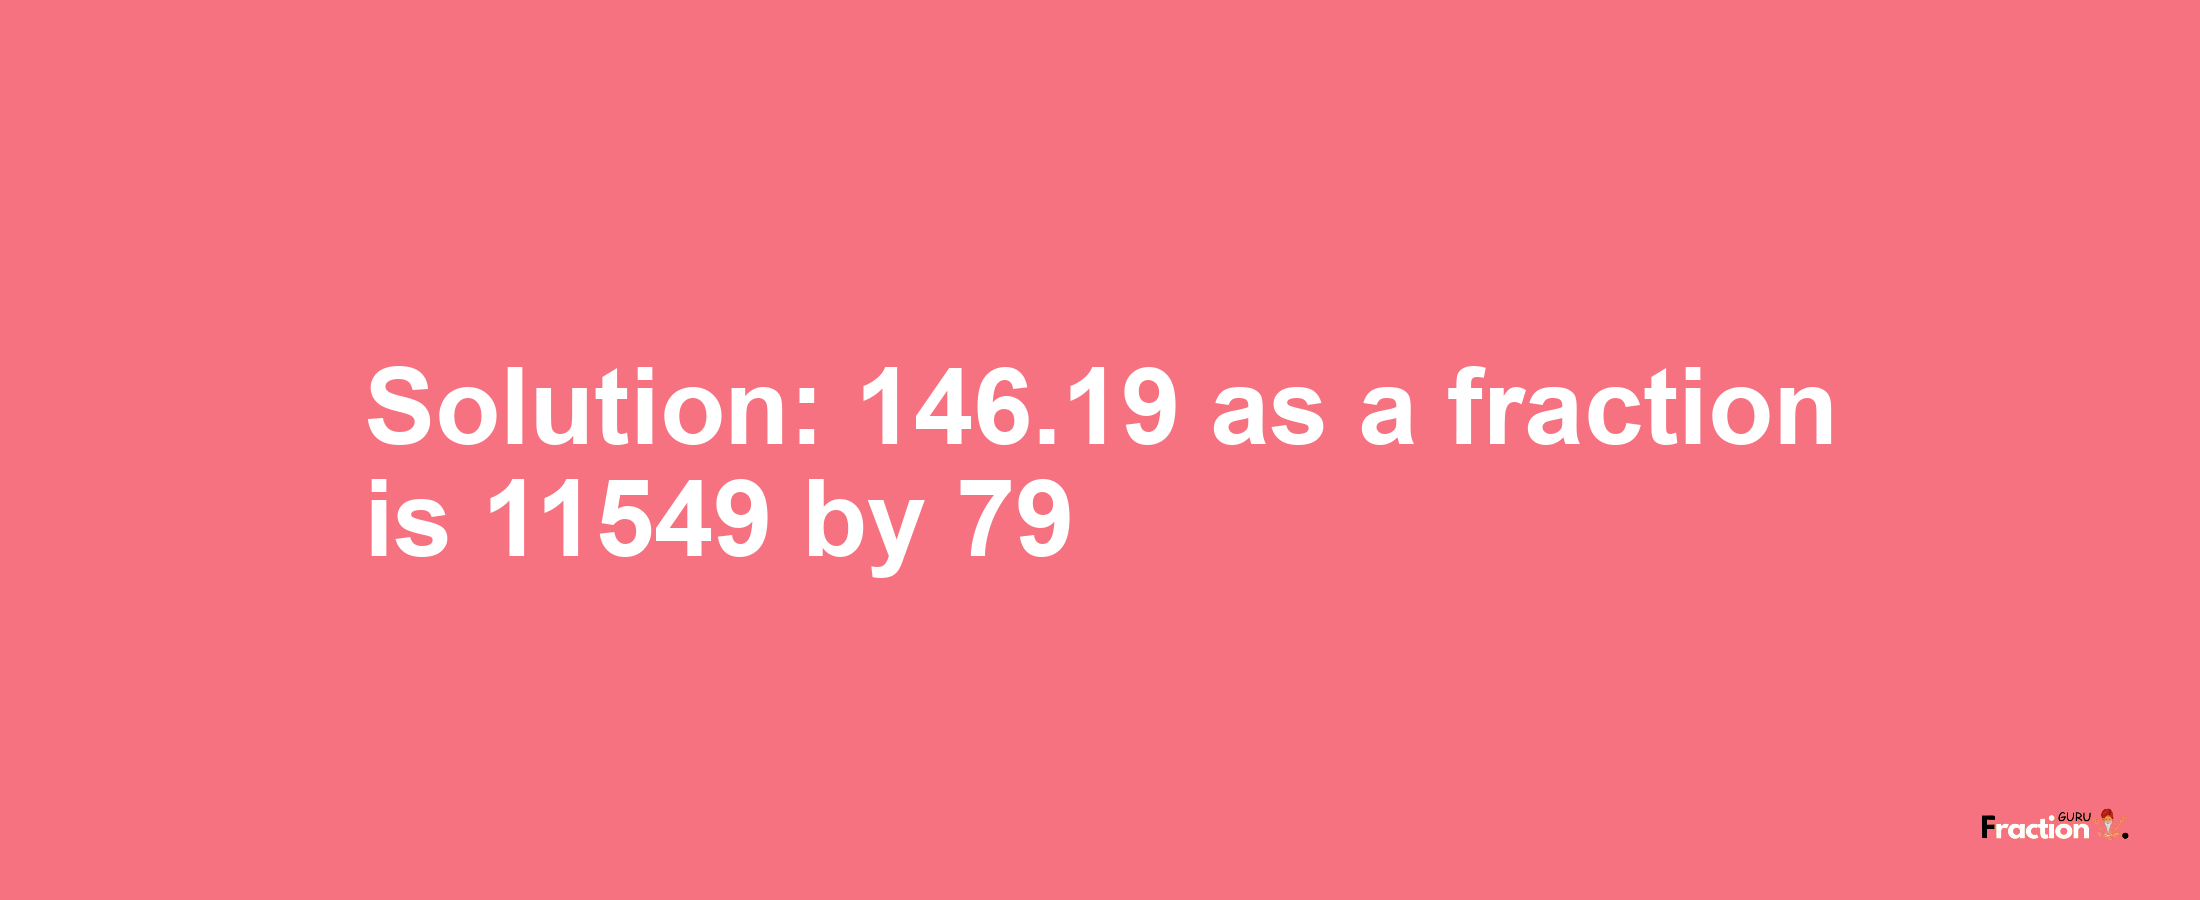 Solution:146.19 as a fraction is 11549/79